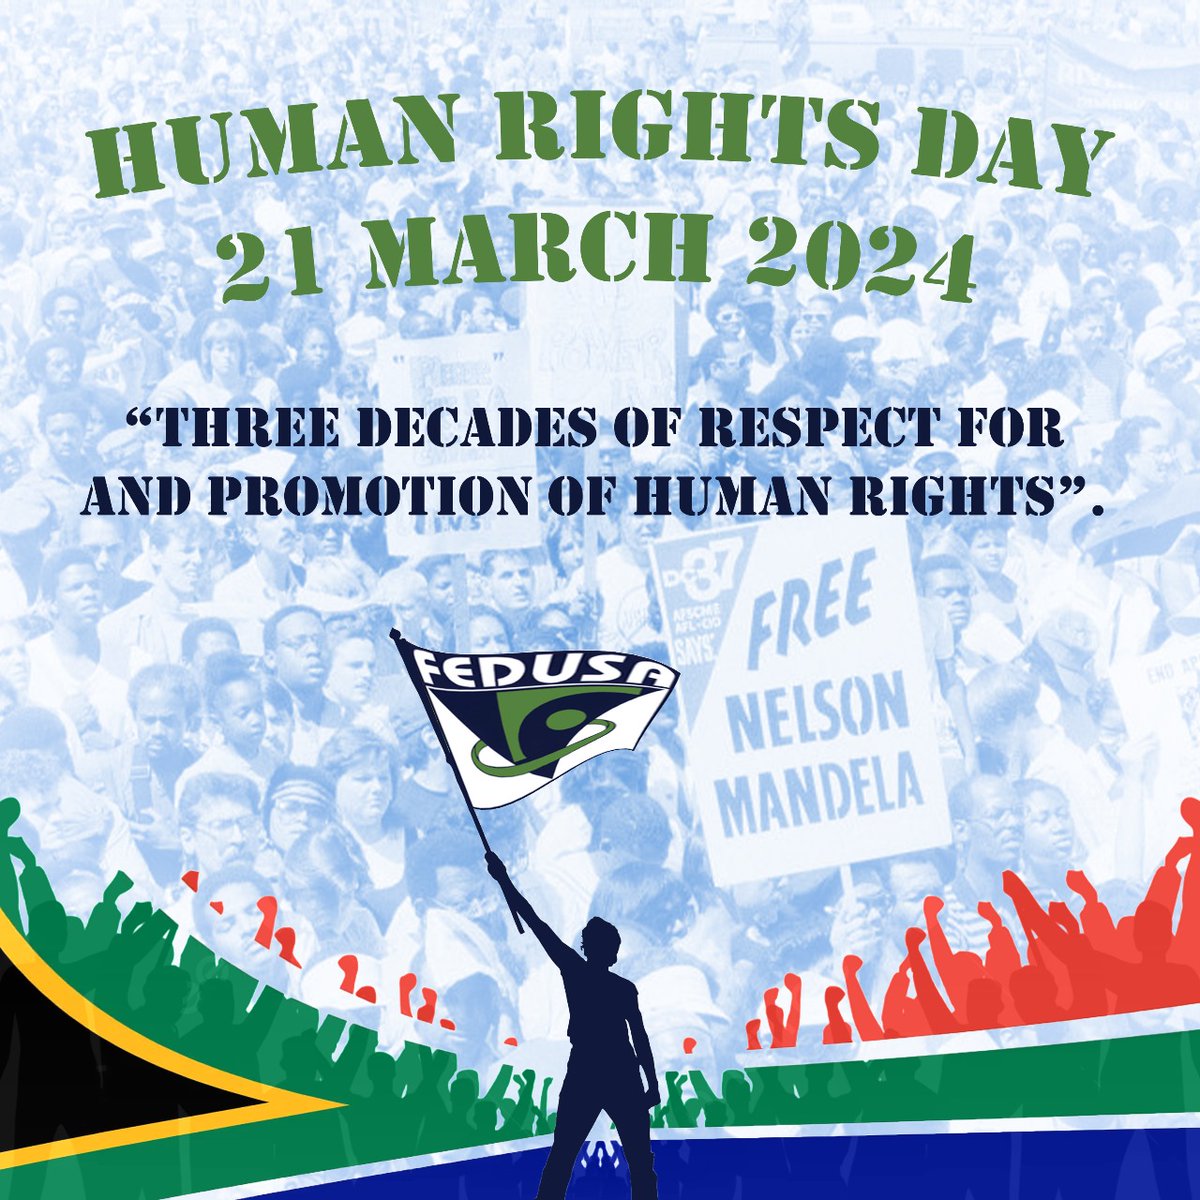 FEDUSA joins South Africa in commemorating Human Rights Day. A day to commemorate and honour those who fought for our liberation and the rights we enjoy today. #HumanRightsMonth2024 #HumanRightsDay #30yrsFreedom #FedusaCares @unionofchoice